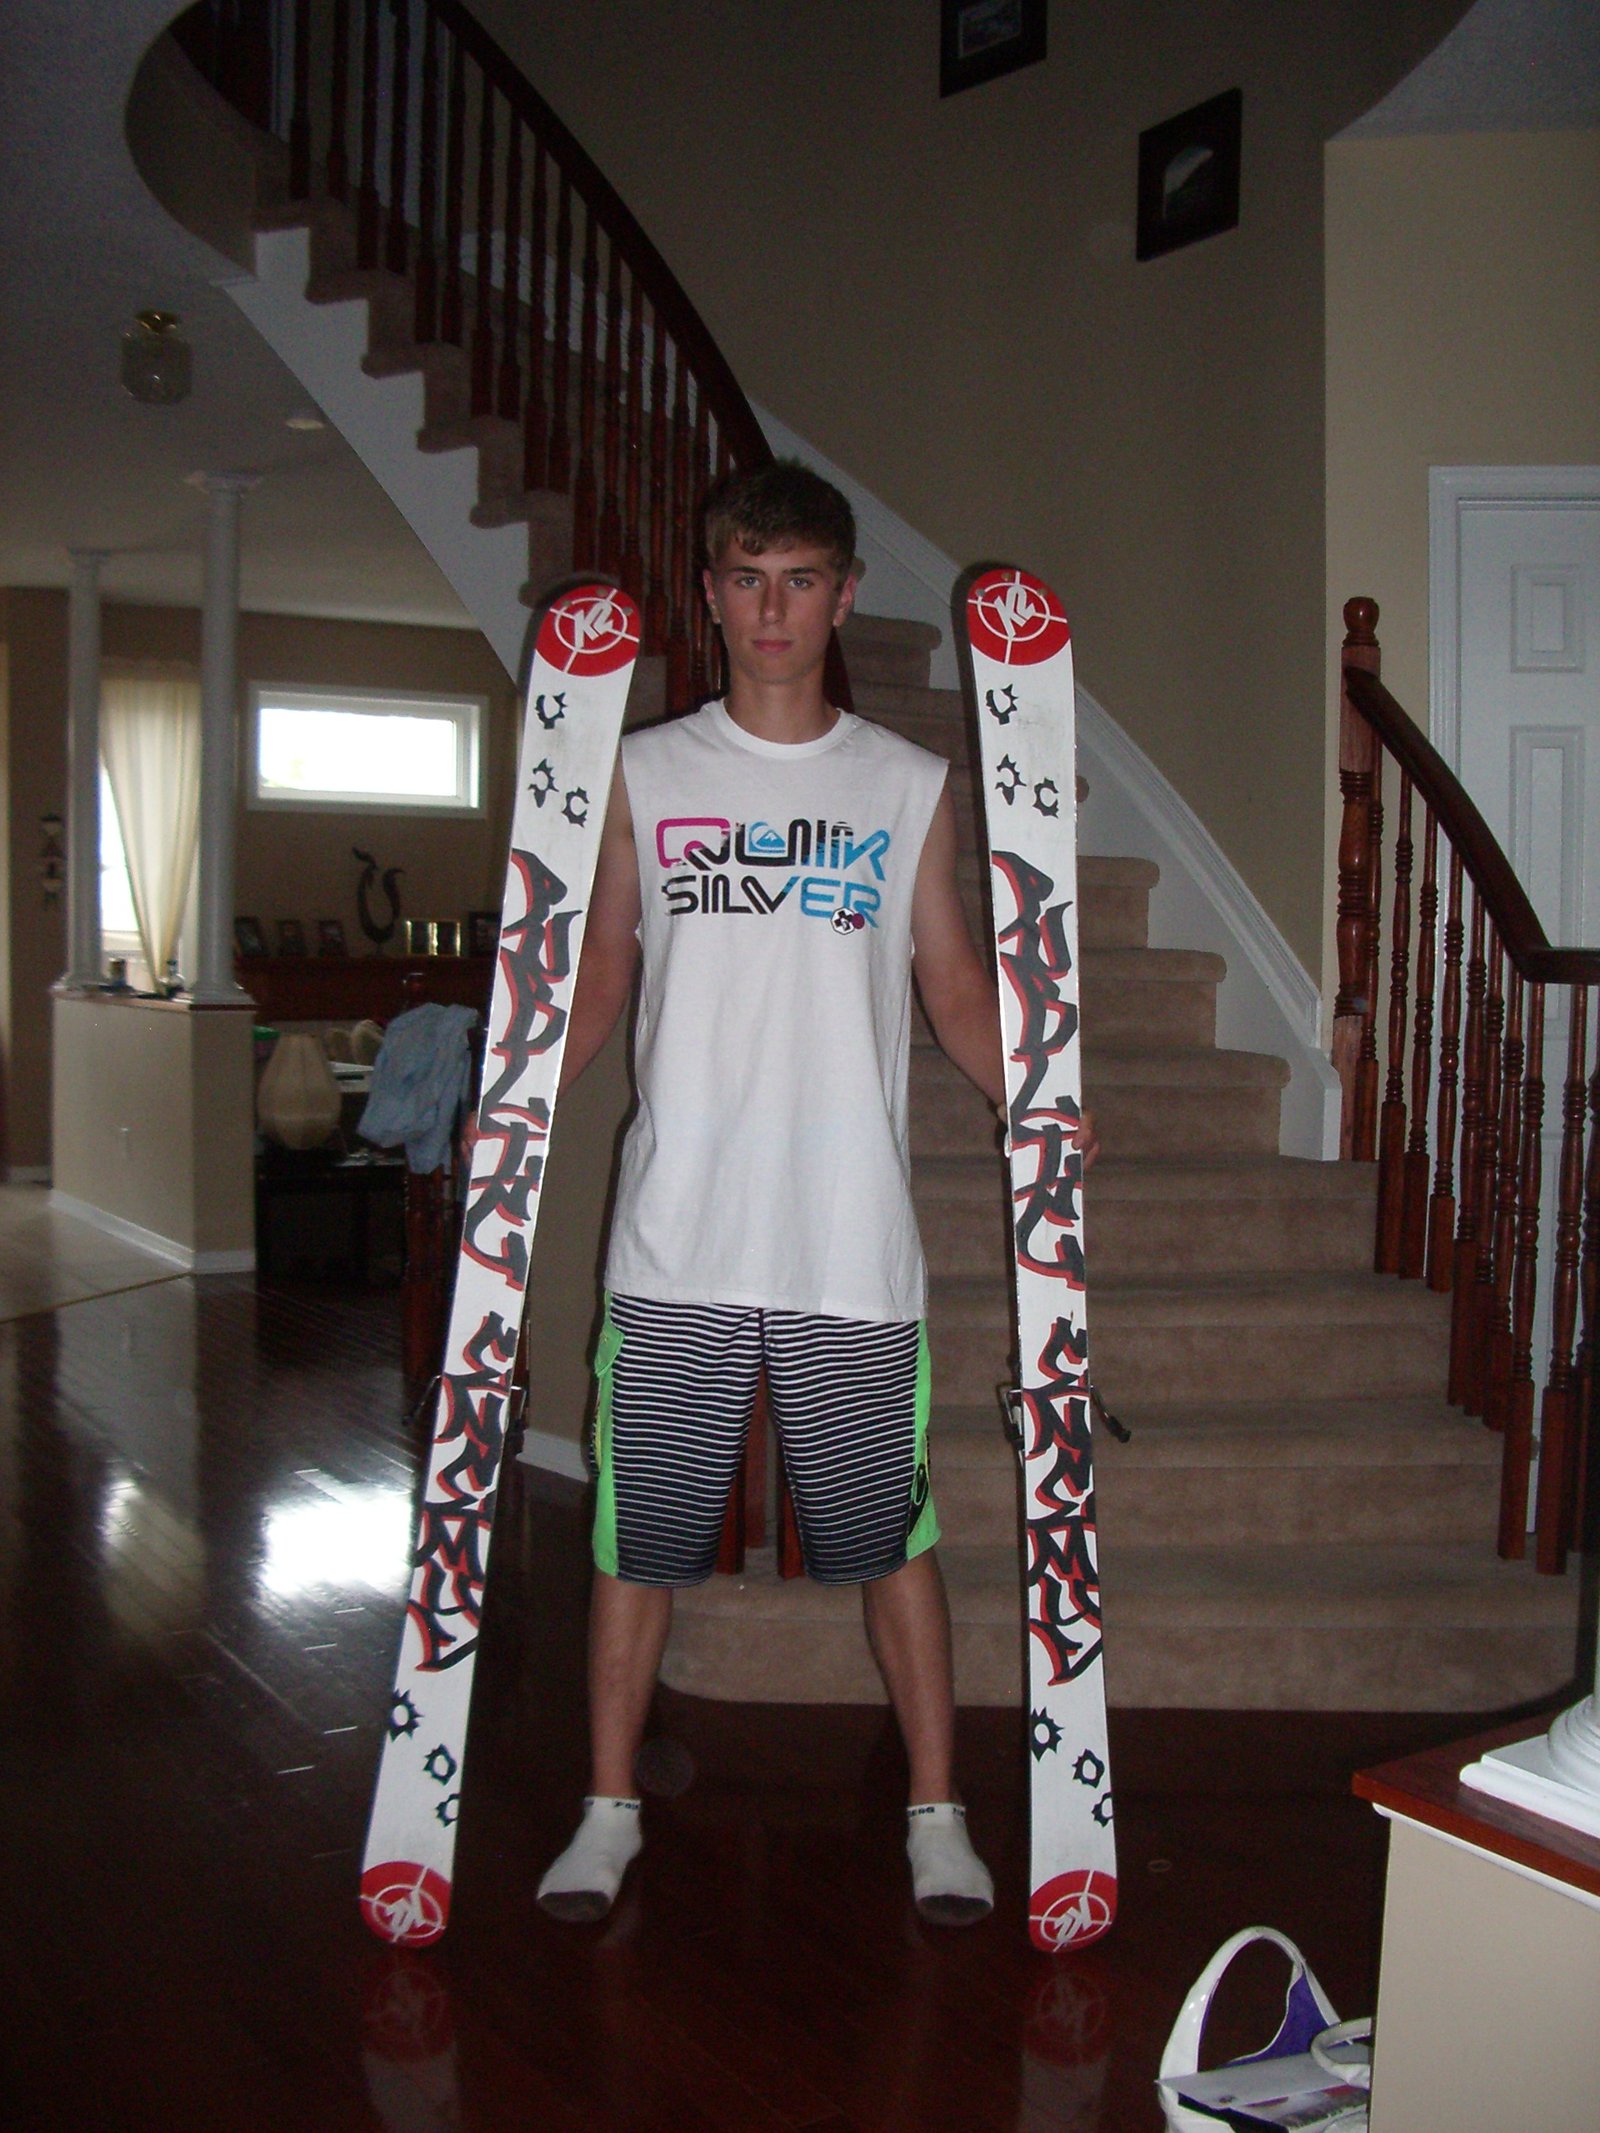 Me and my skis